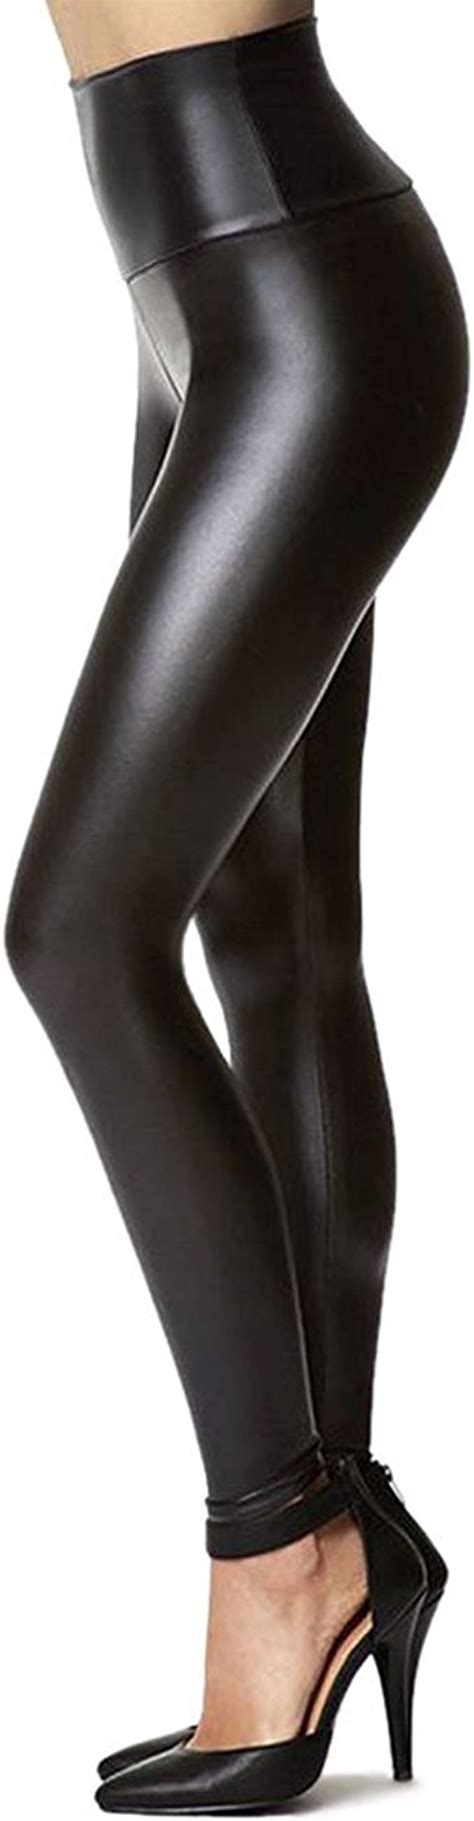 Womens Stretchy Faux Leather Leggings Pants Sexy Black High Waisted